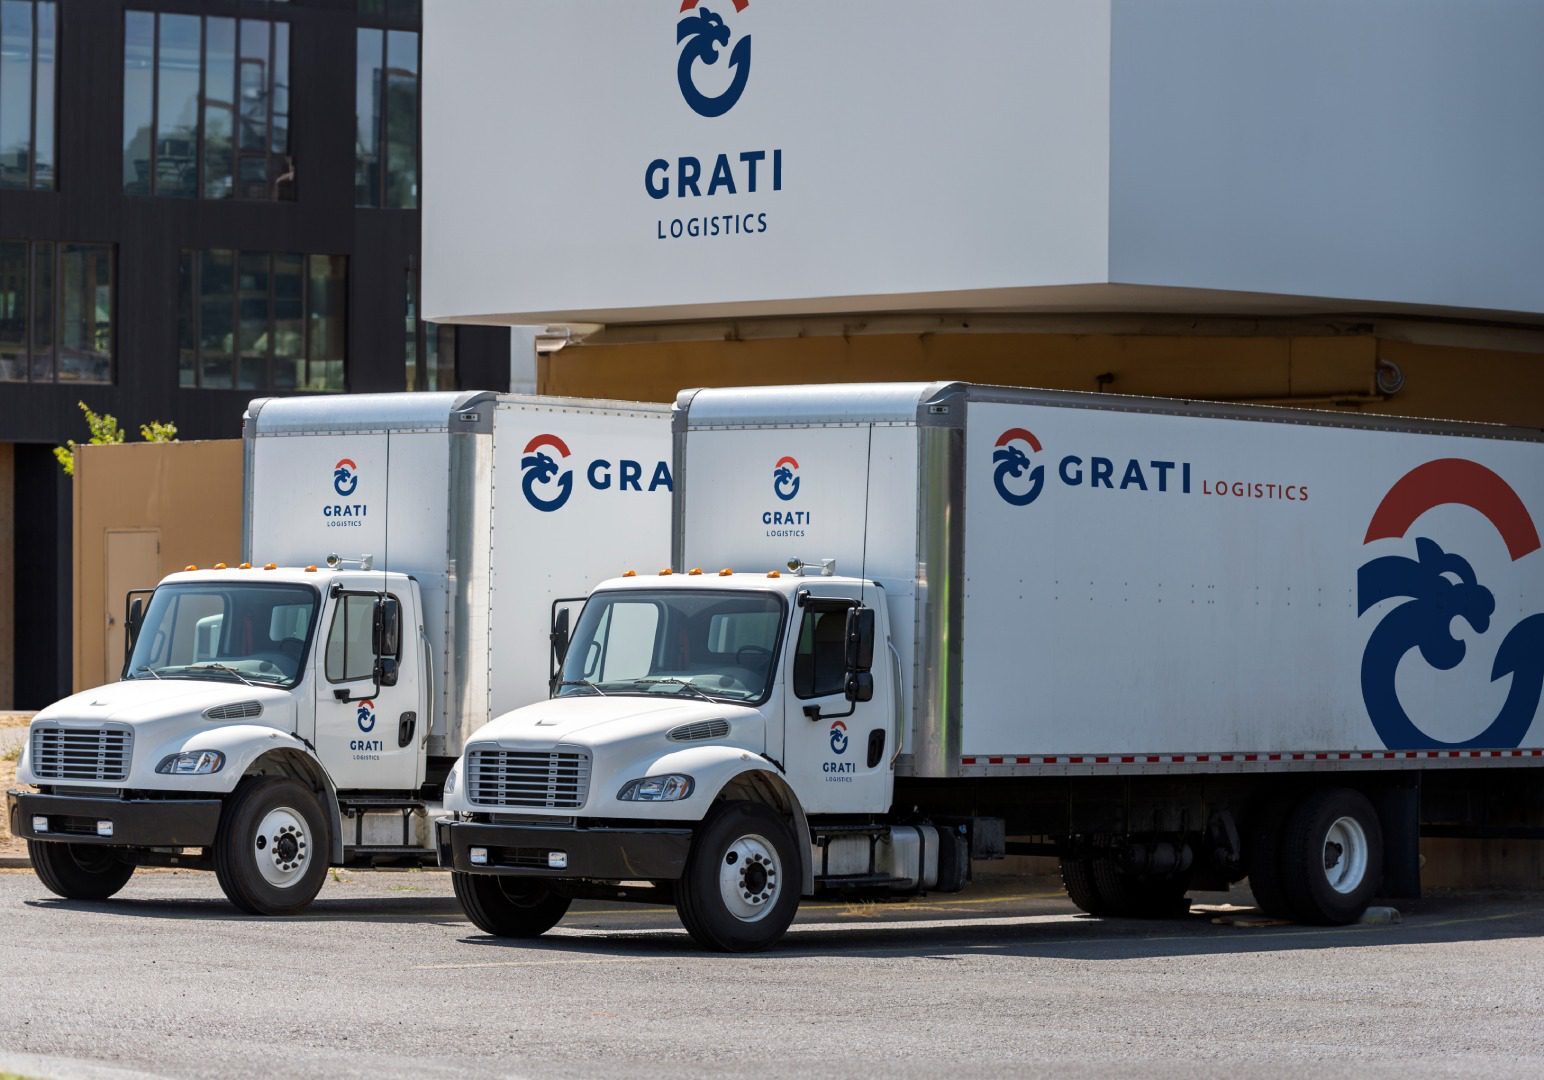 Three white trucks parked in front of a building.